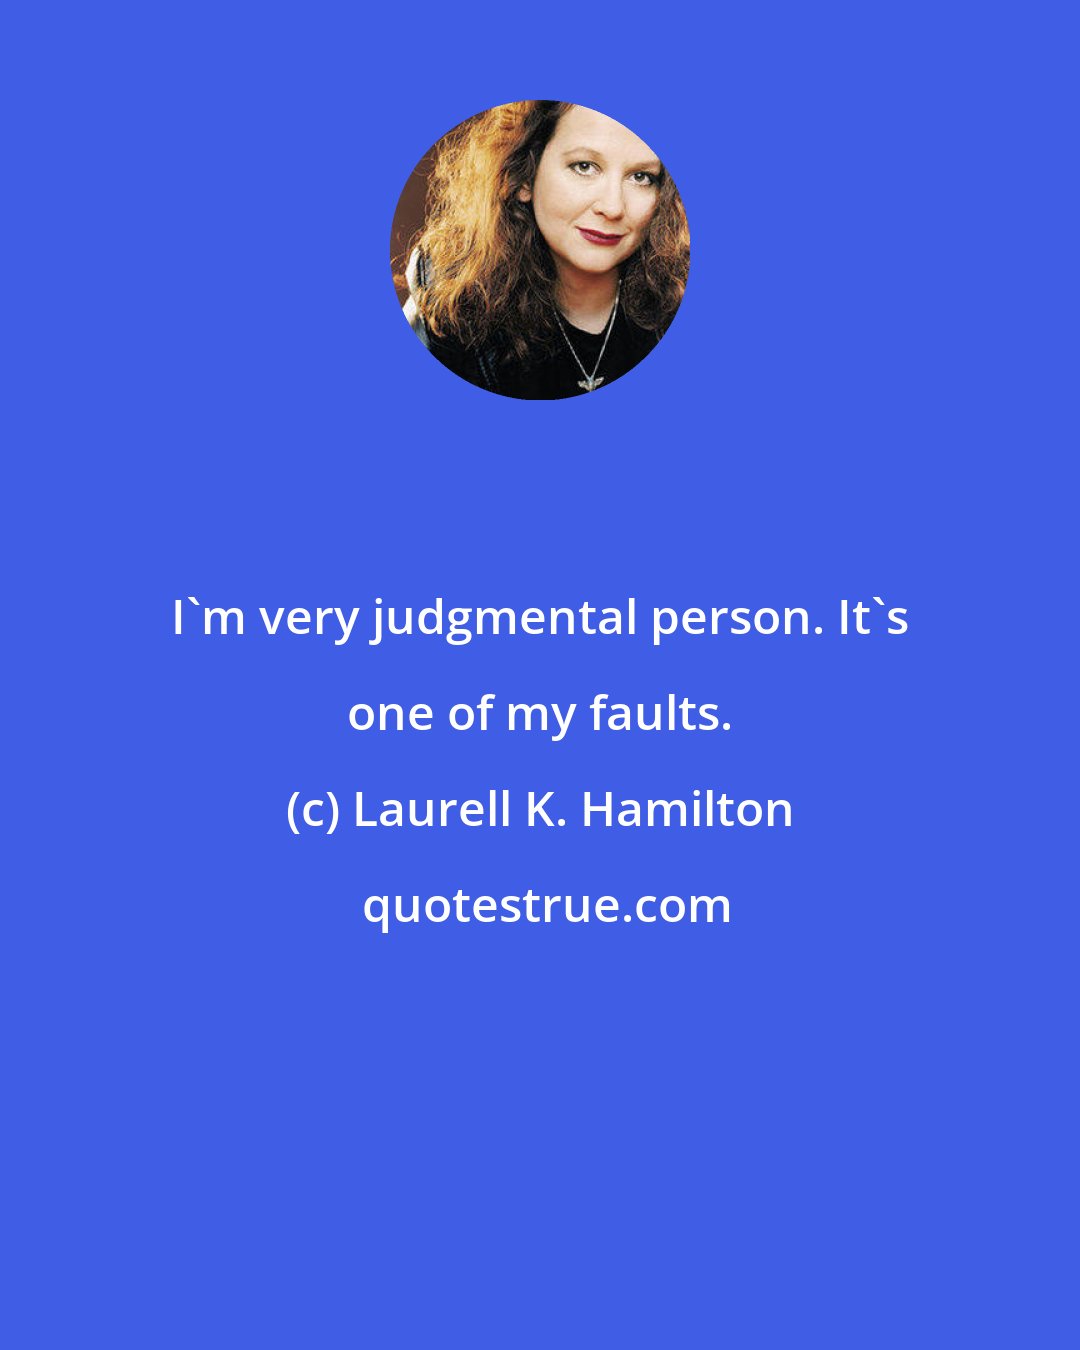 Laurell K. Hamilton: I'm very judgmental person. It's one of my faults.